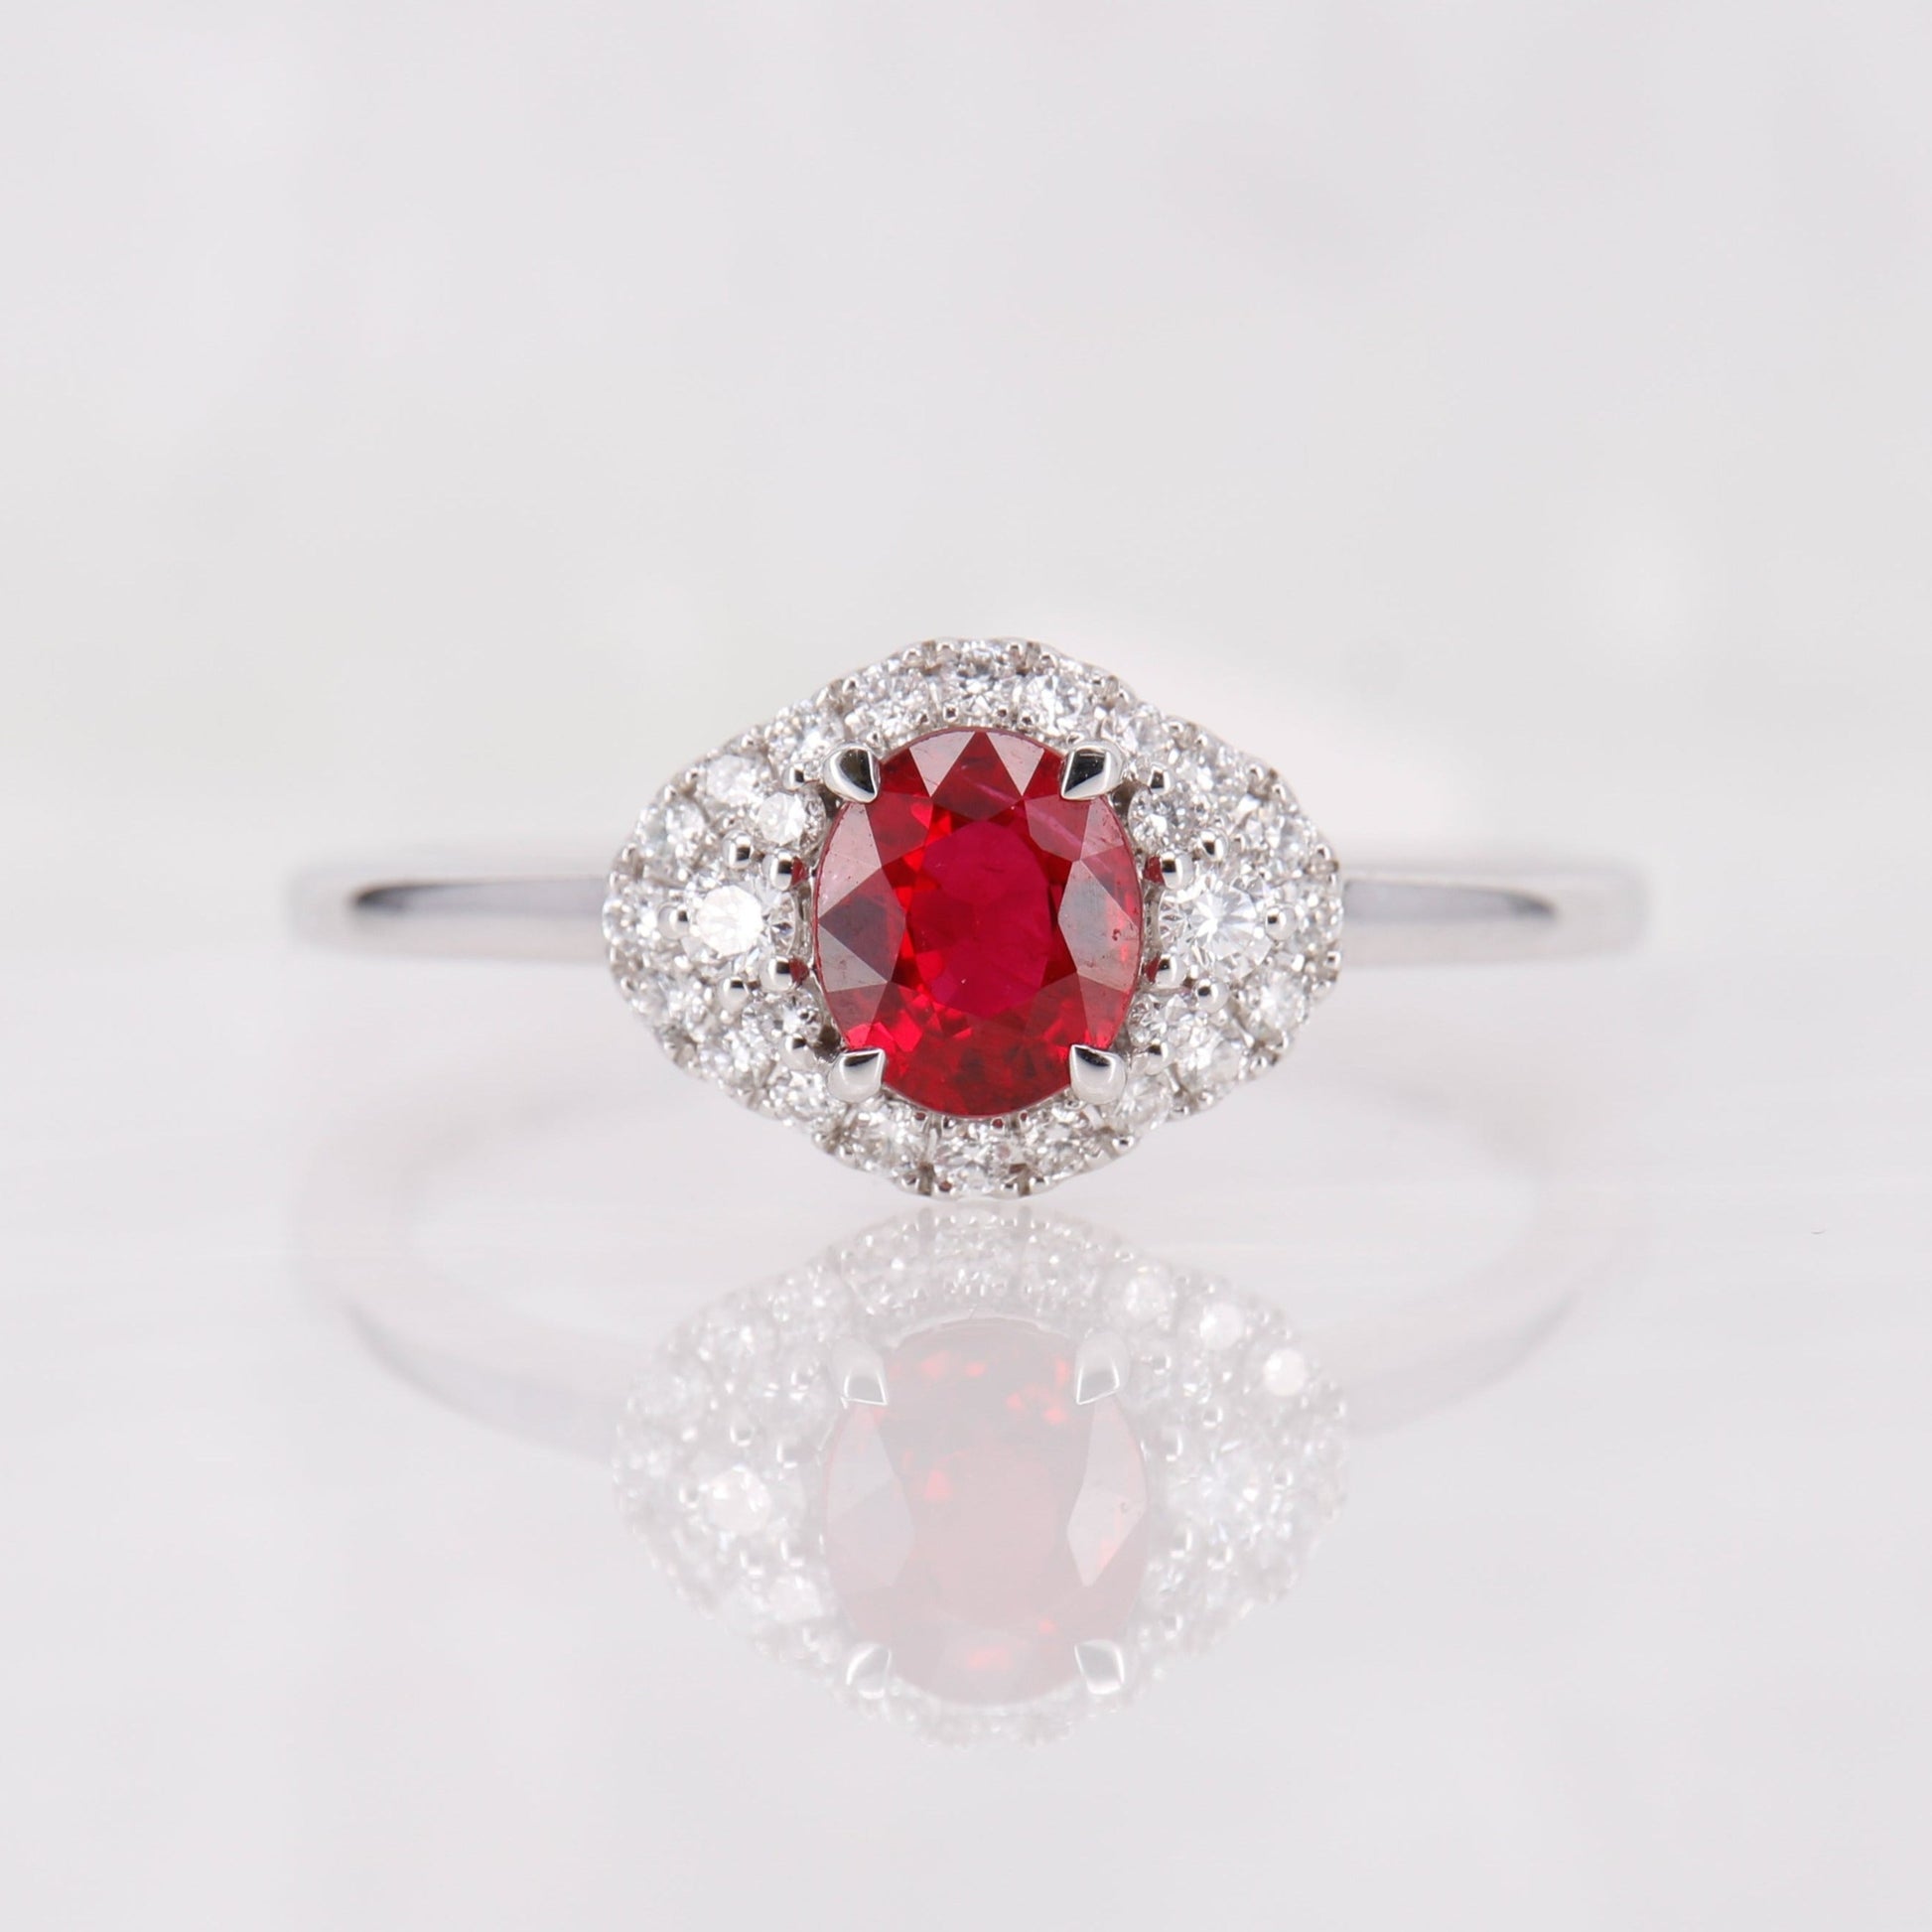 18ct White Gold oval cut Ruby and diamond halo ring. 